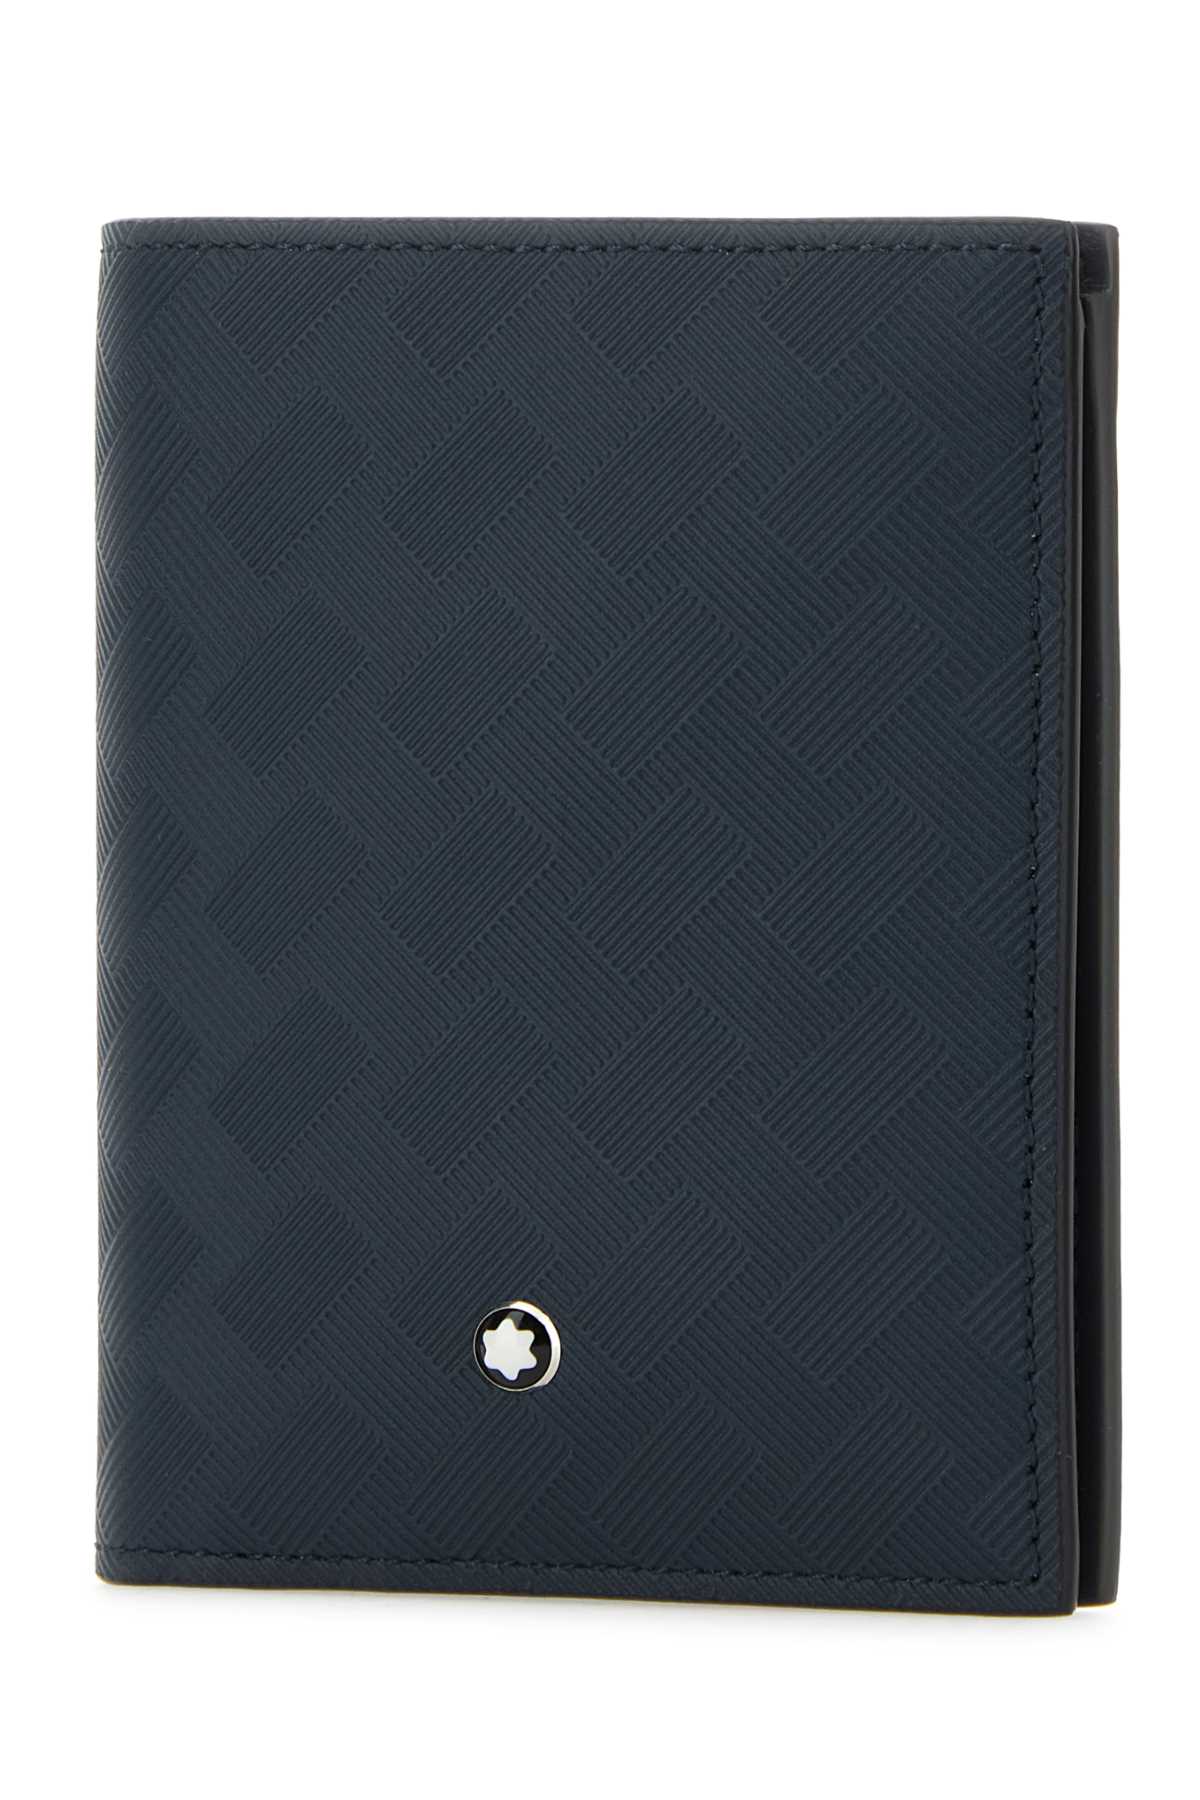 Montblanc Navy Blue Leather Wallet In Inkblue